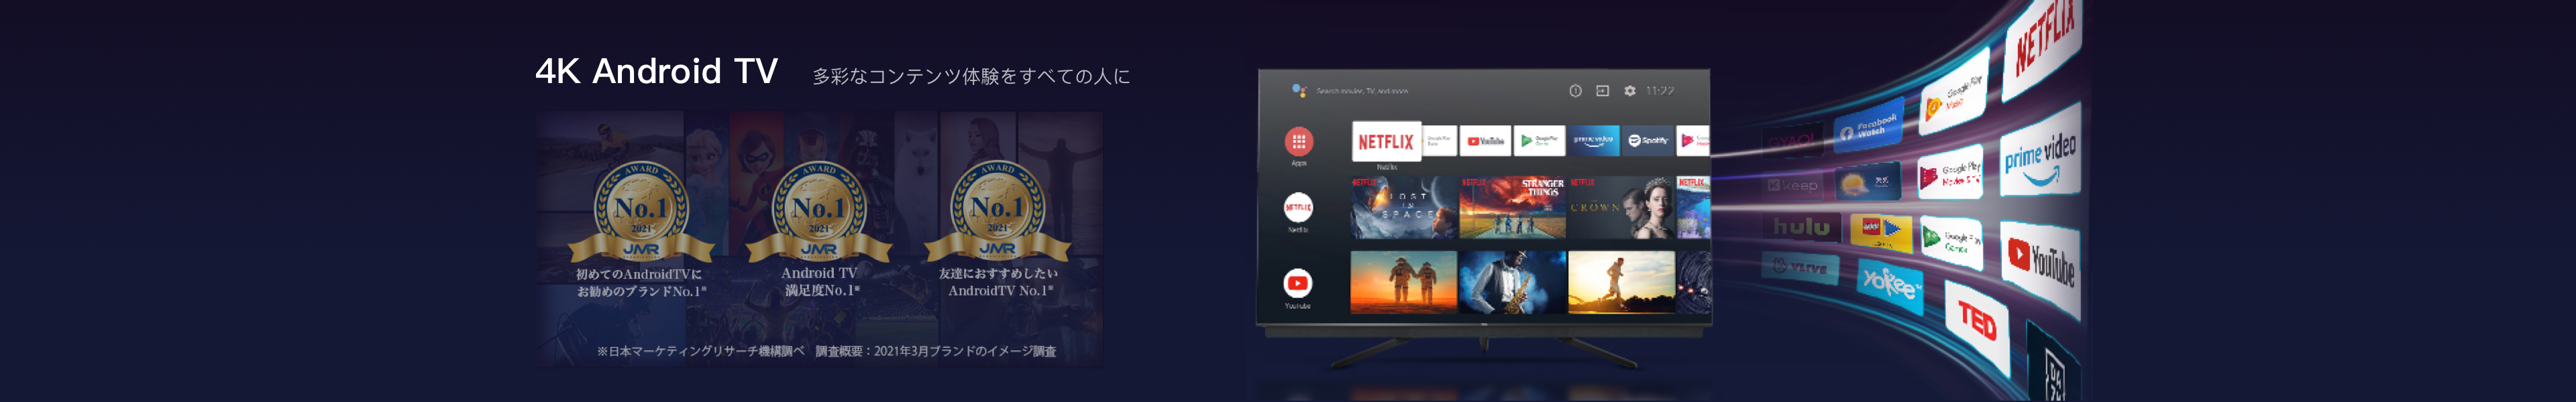 TCL 4K Android TV 